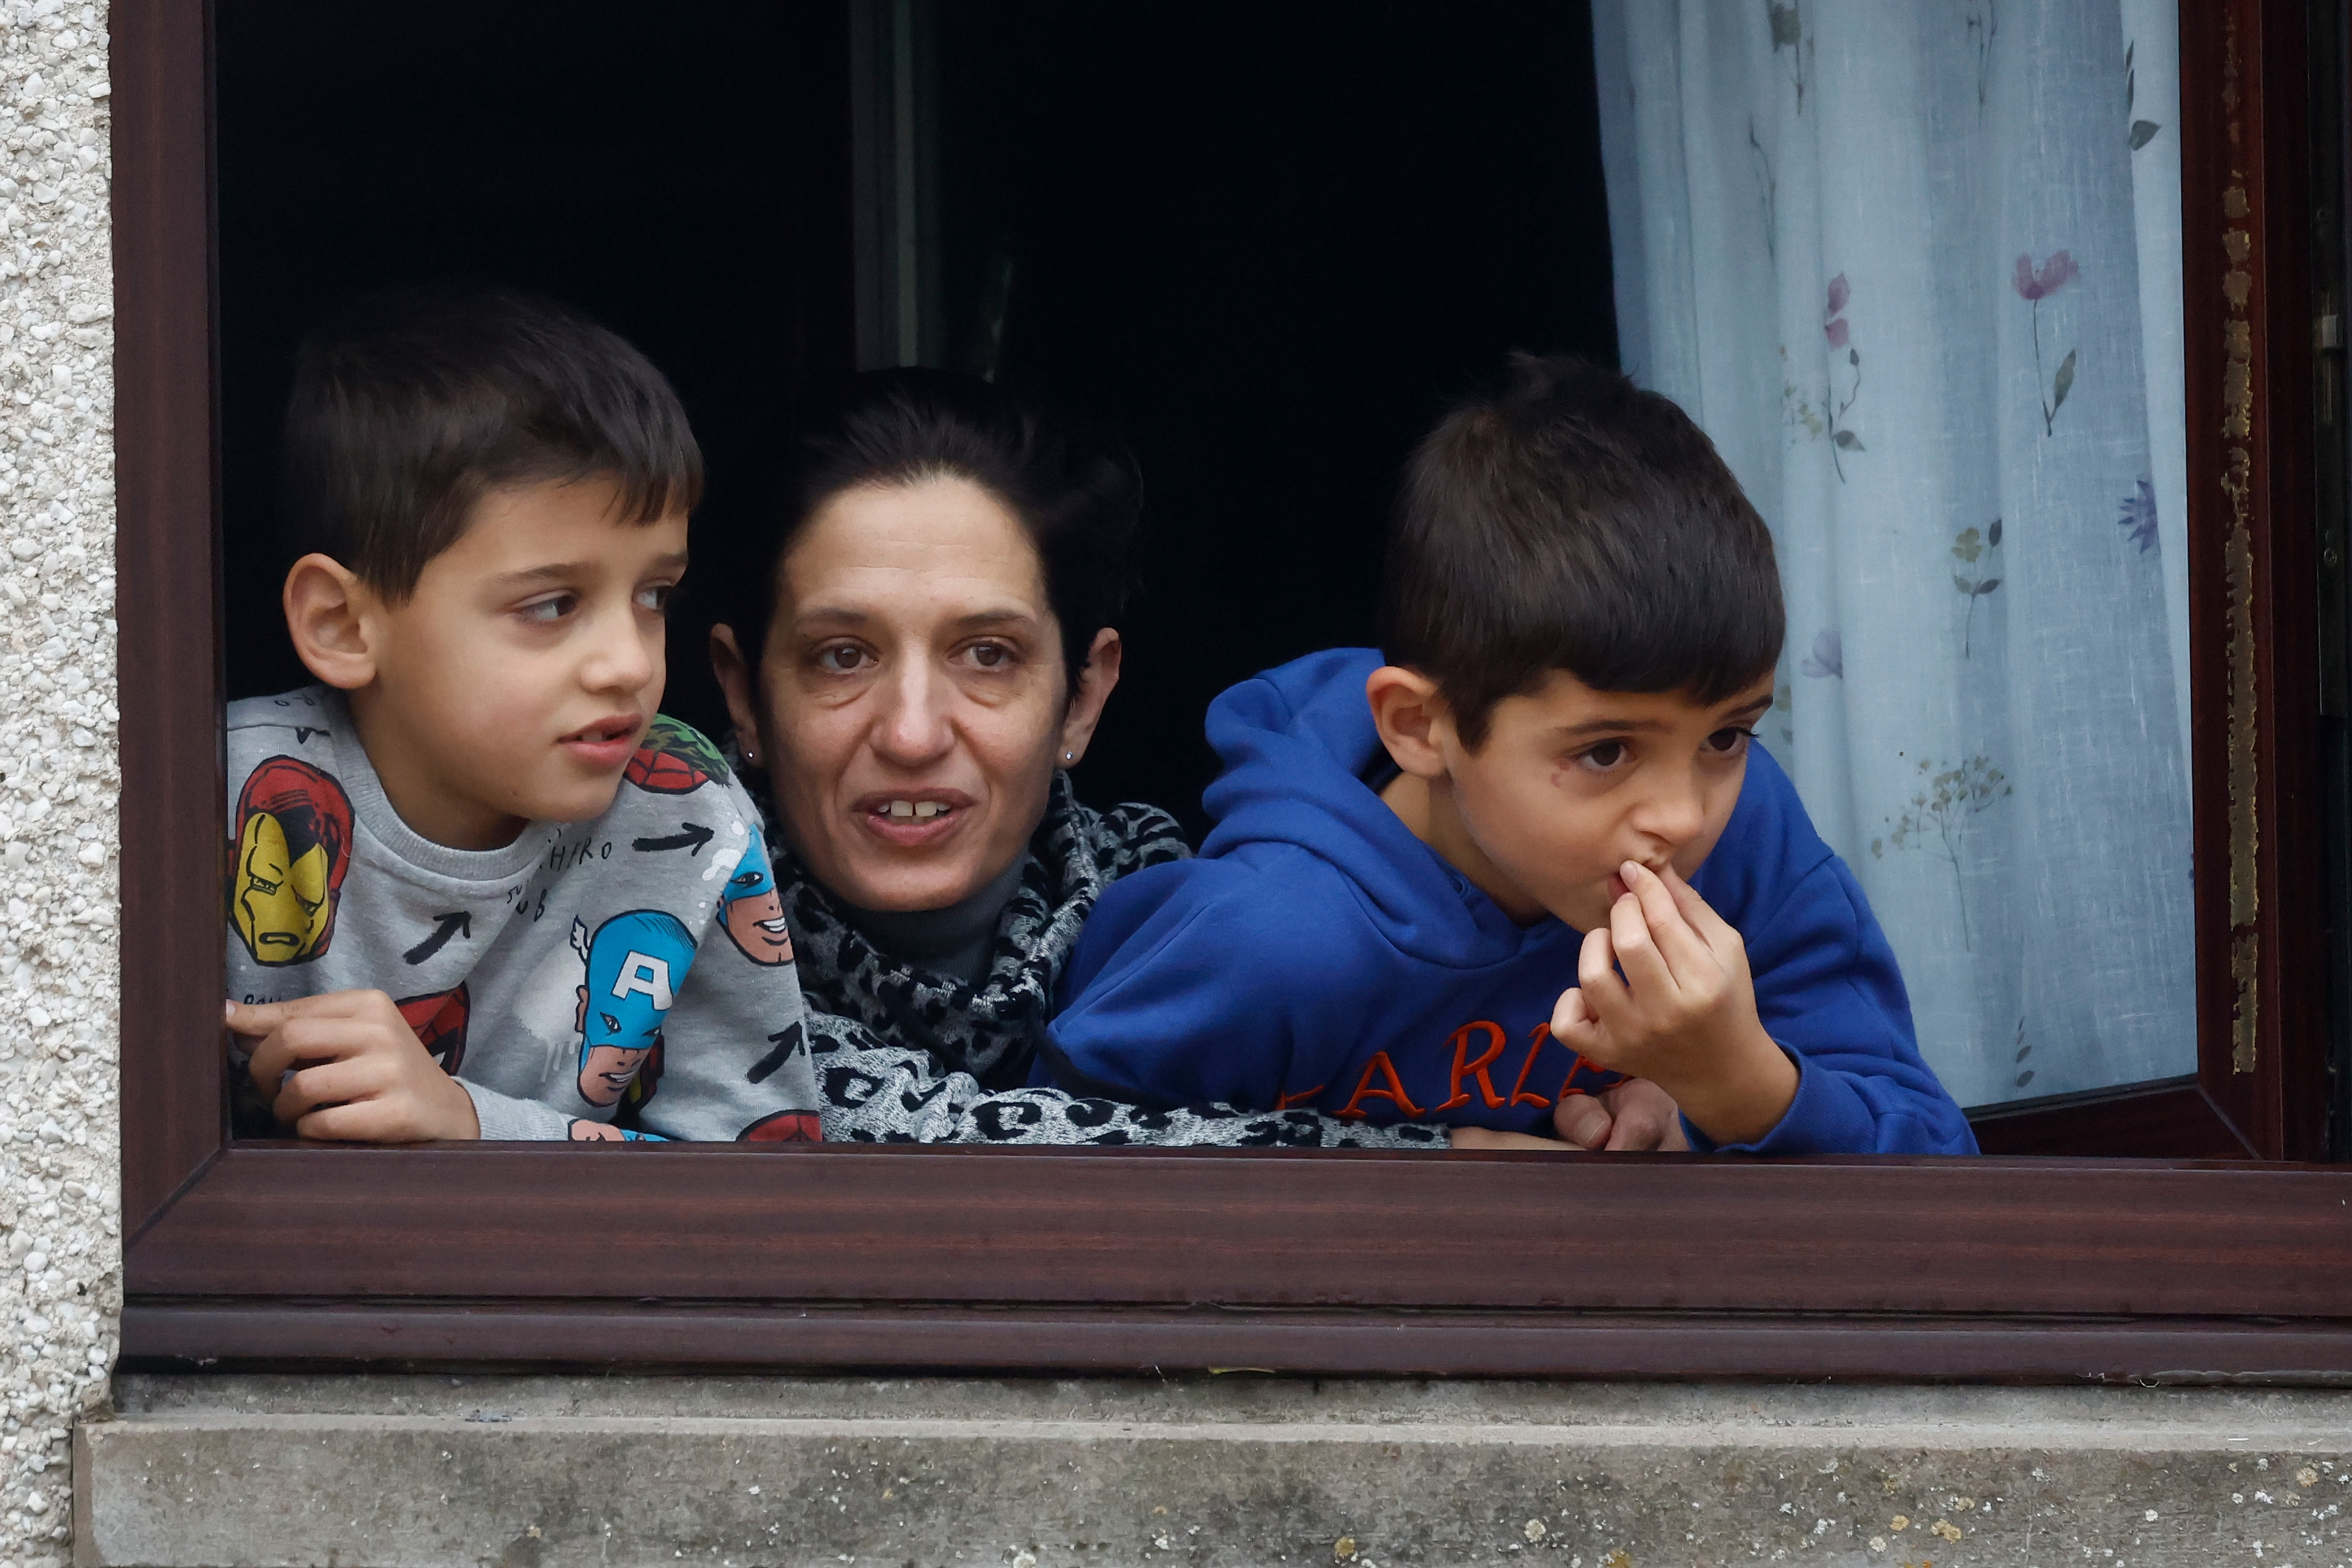 A woman and two boys looked worried as they stared out of a window at the chaos